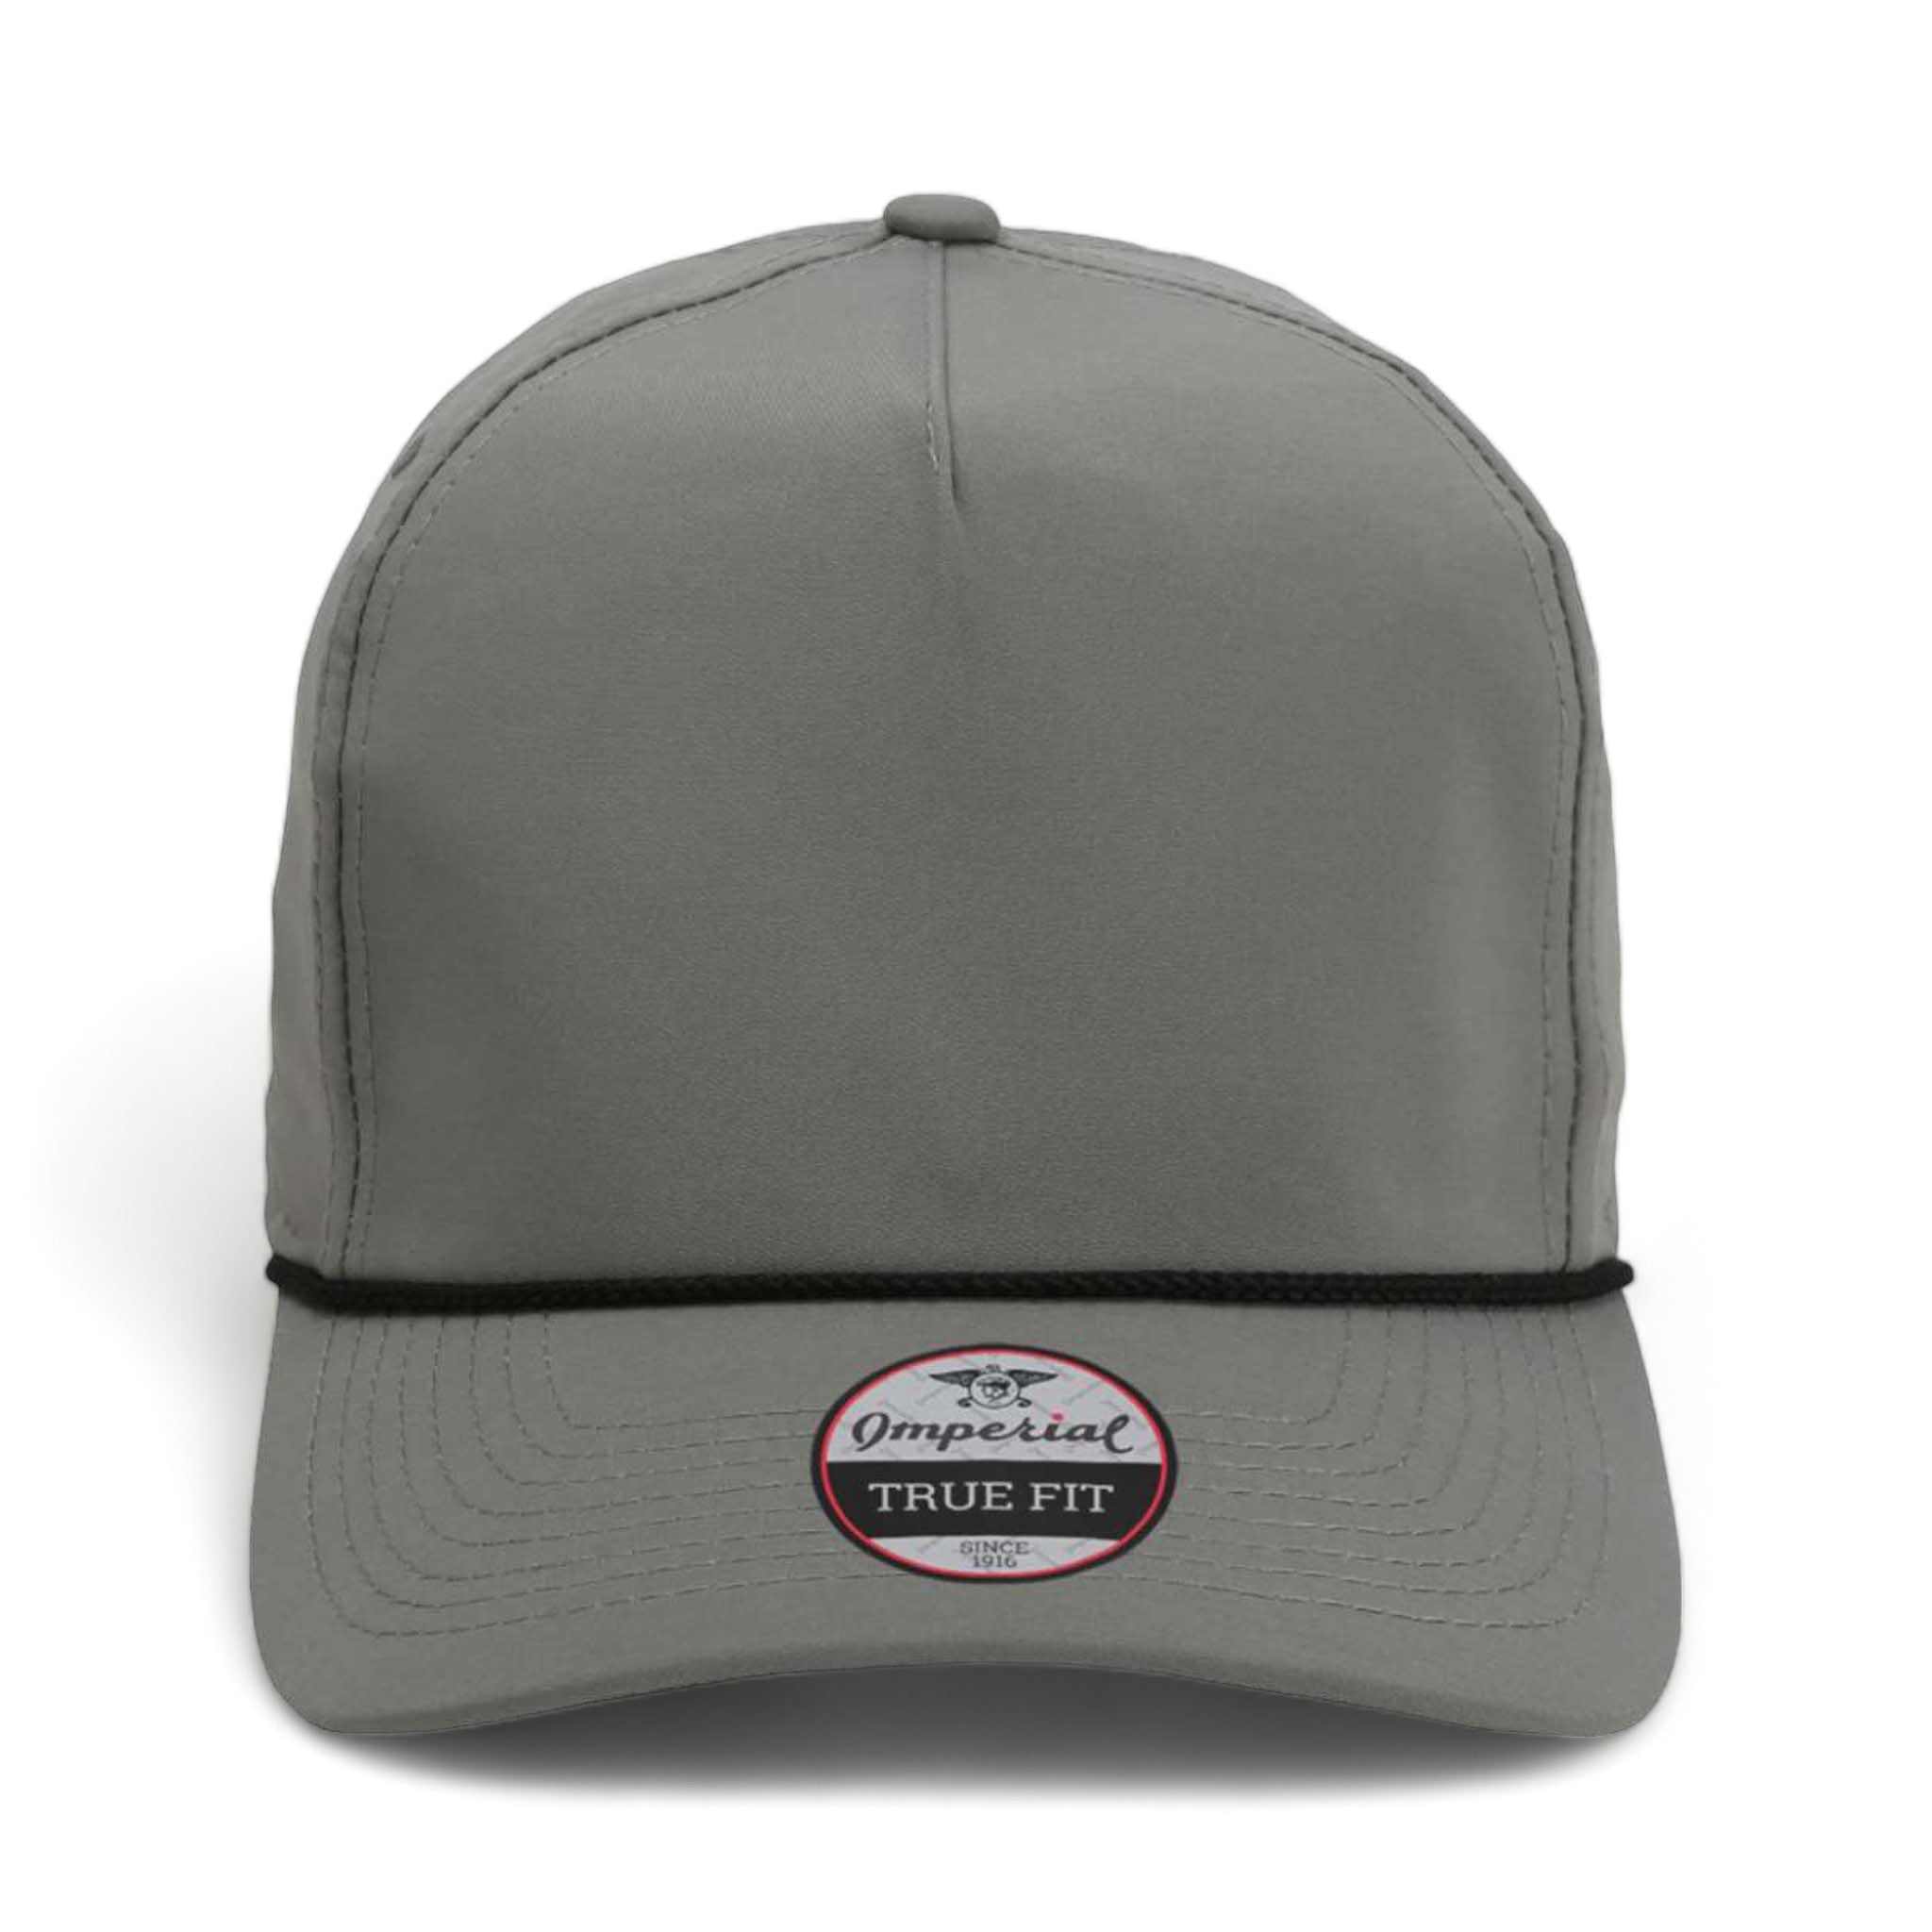 Front view of Imperial 5054 custom hat in grey and black